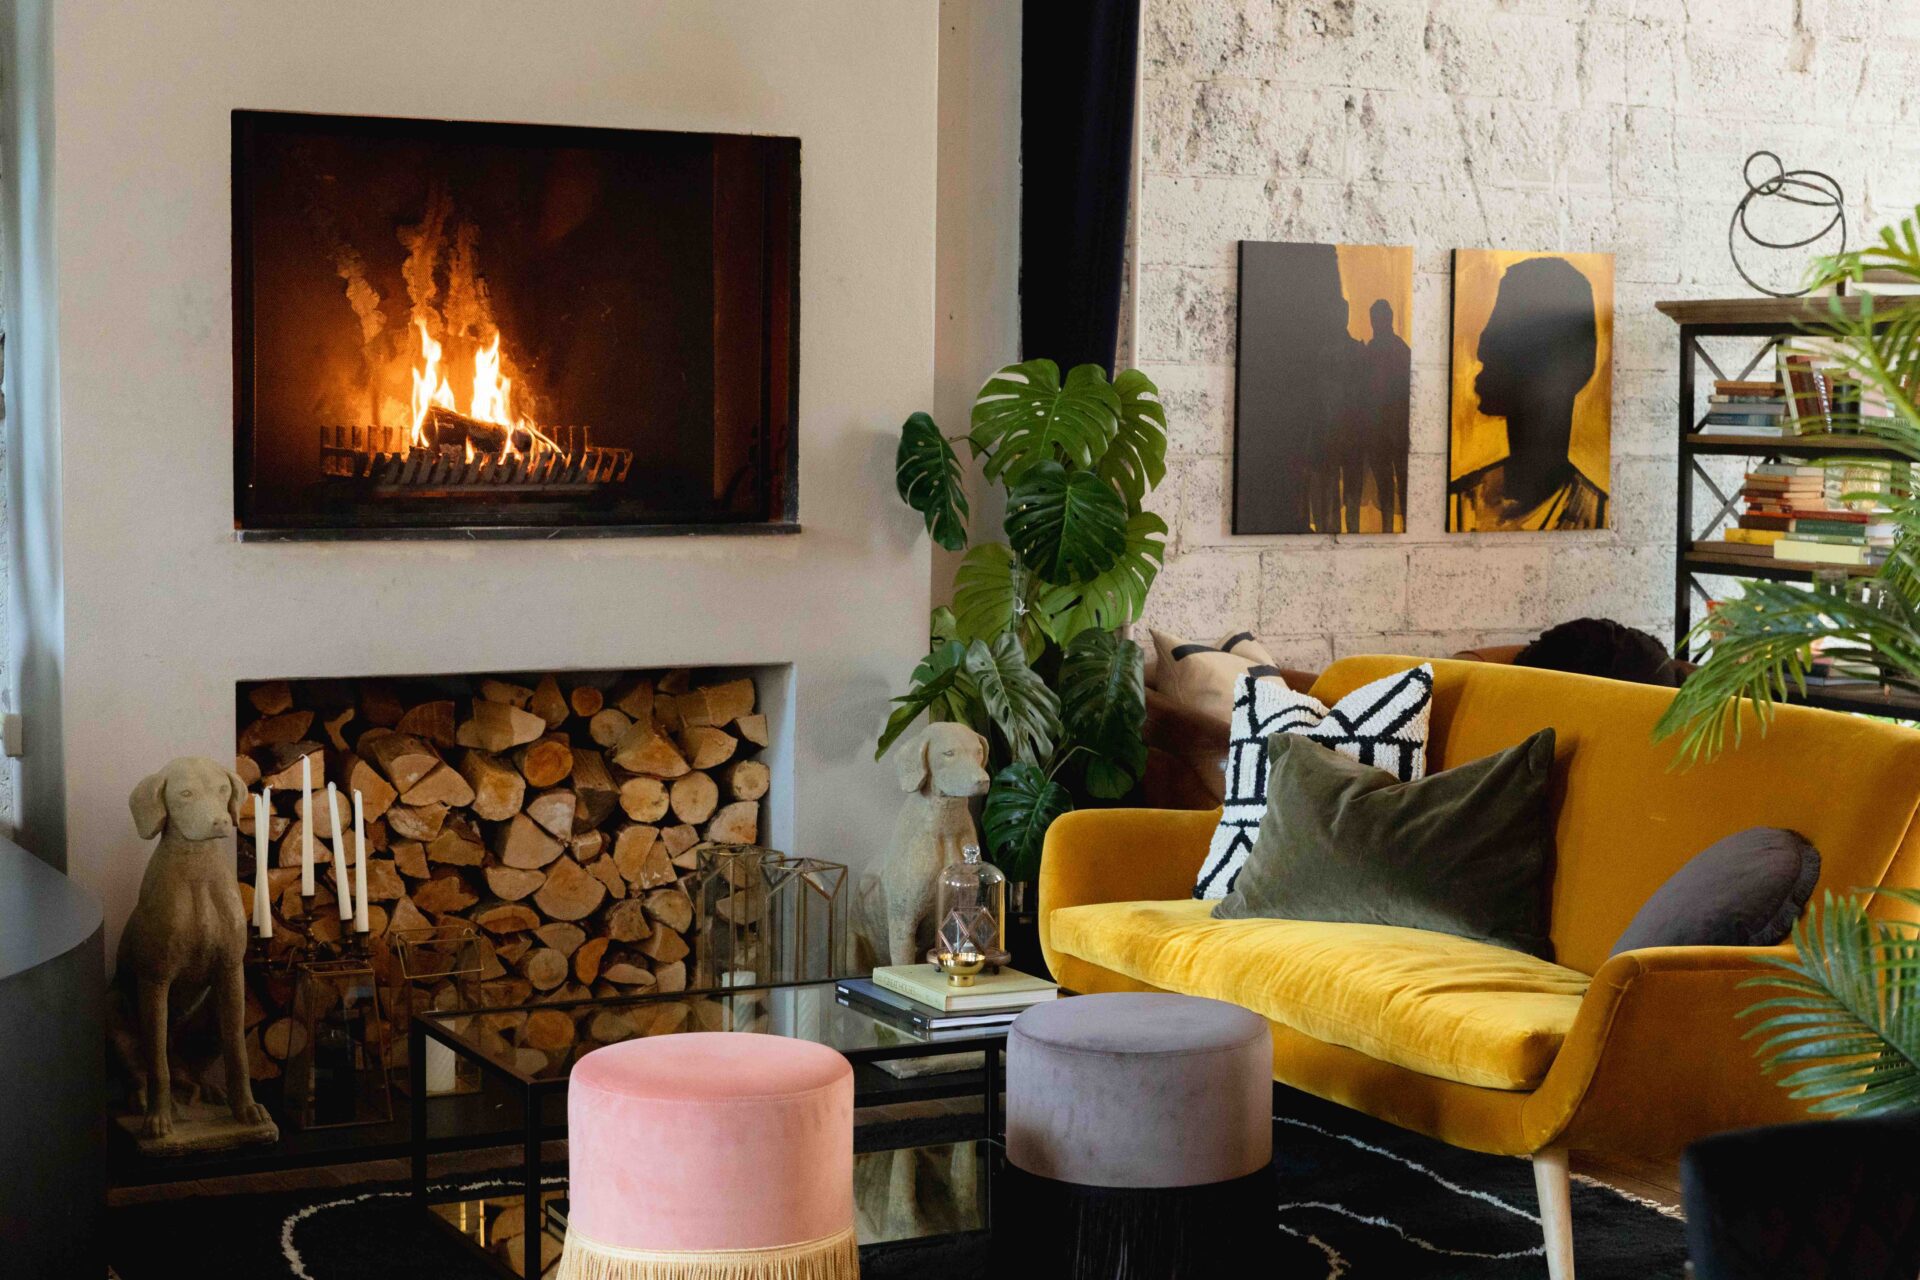 Seating, yellow sofa in front of fireplace